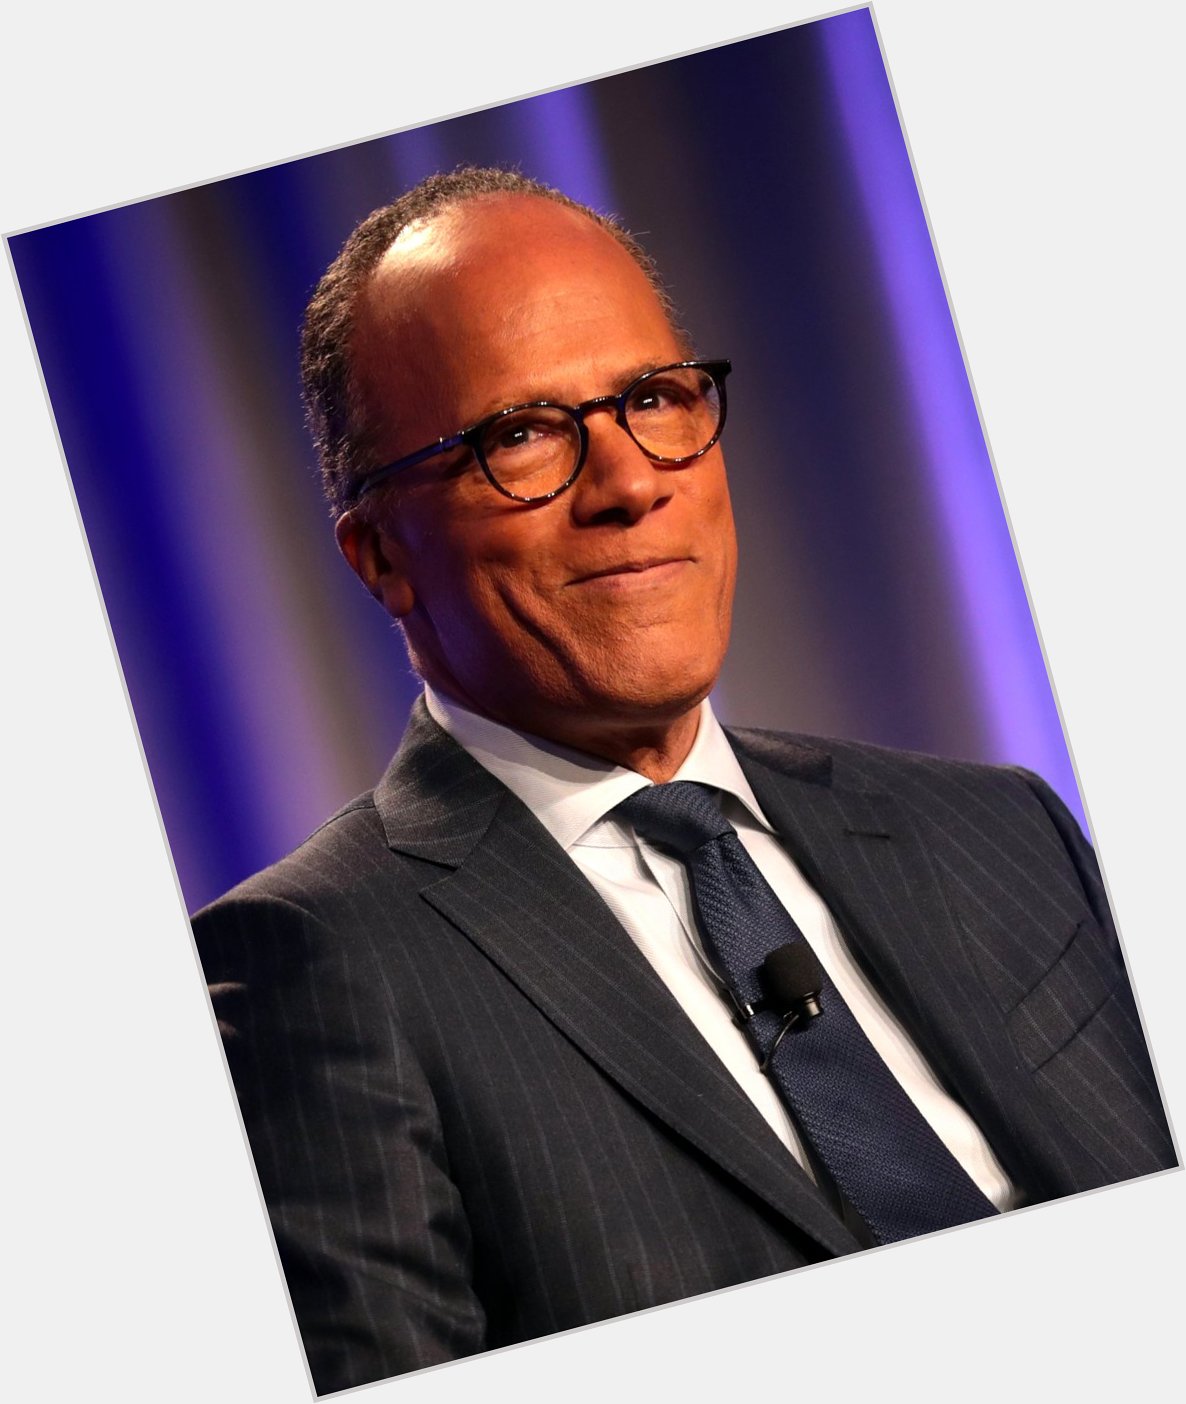 Happy International Women\s Day! And a happy birthday to Lester Holt. 